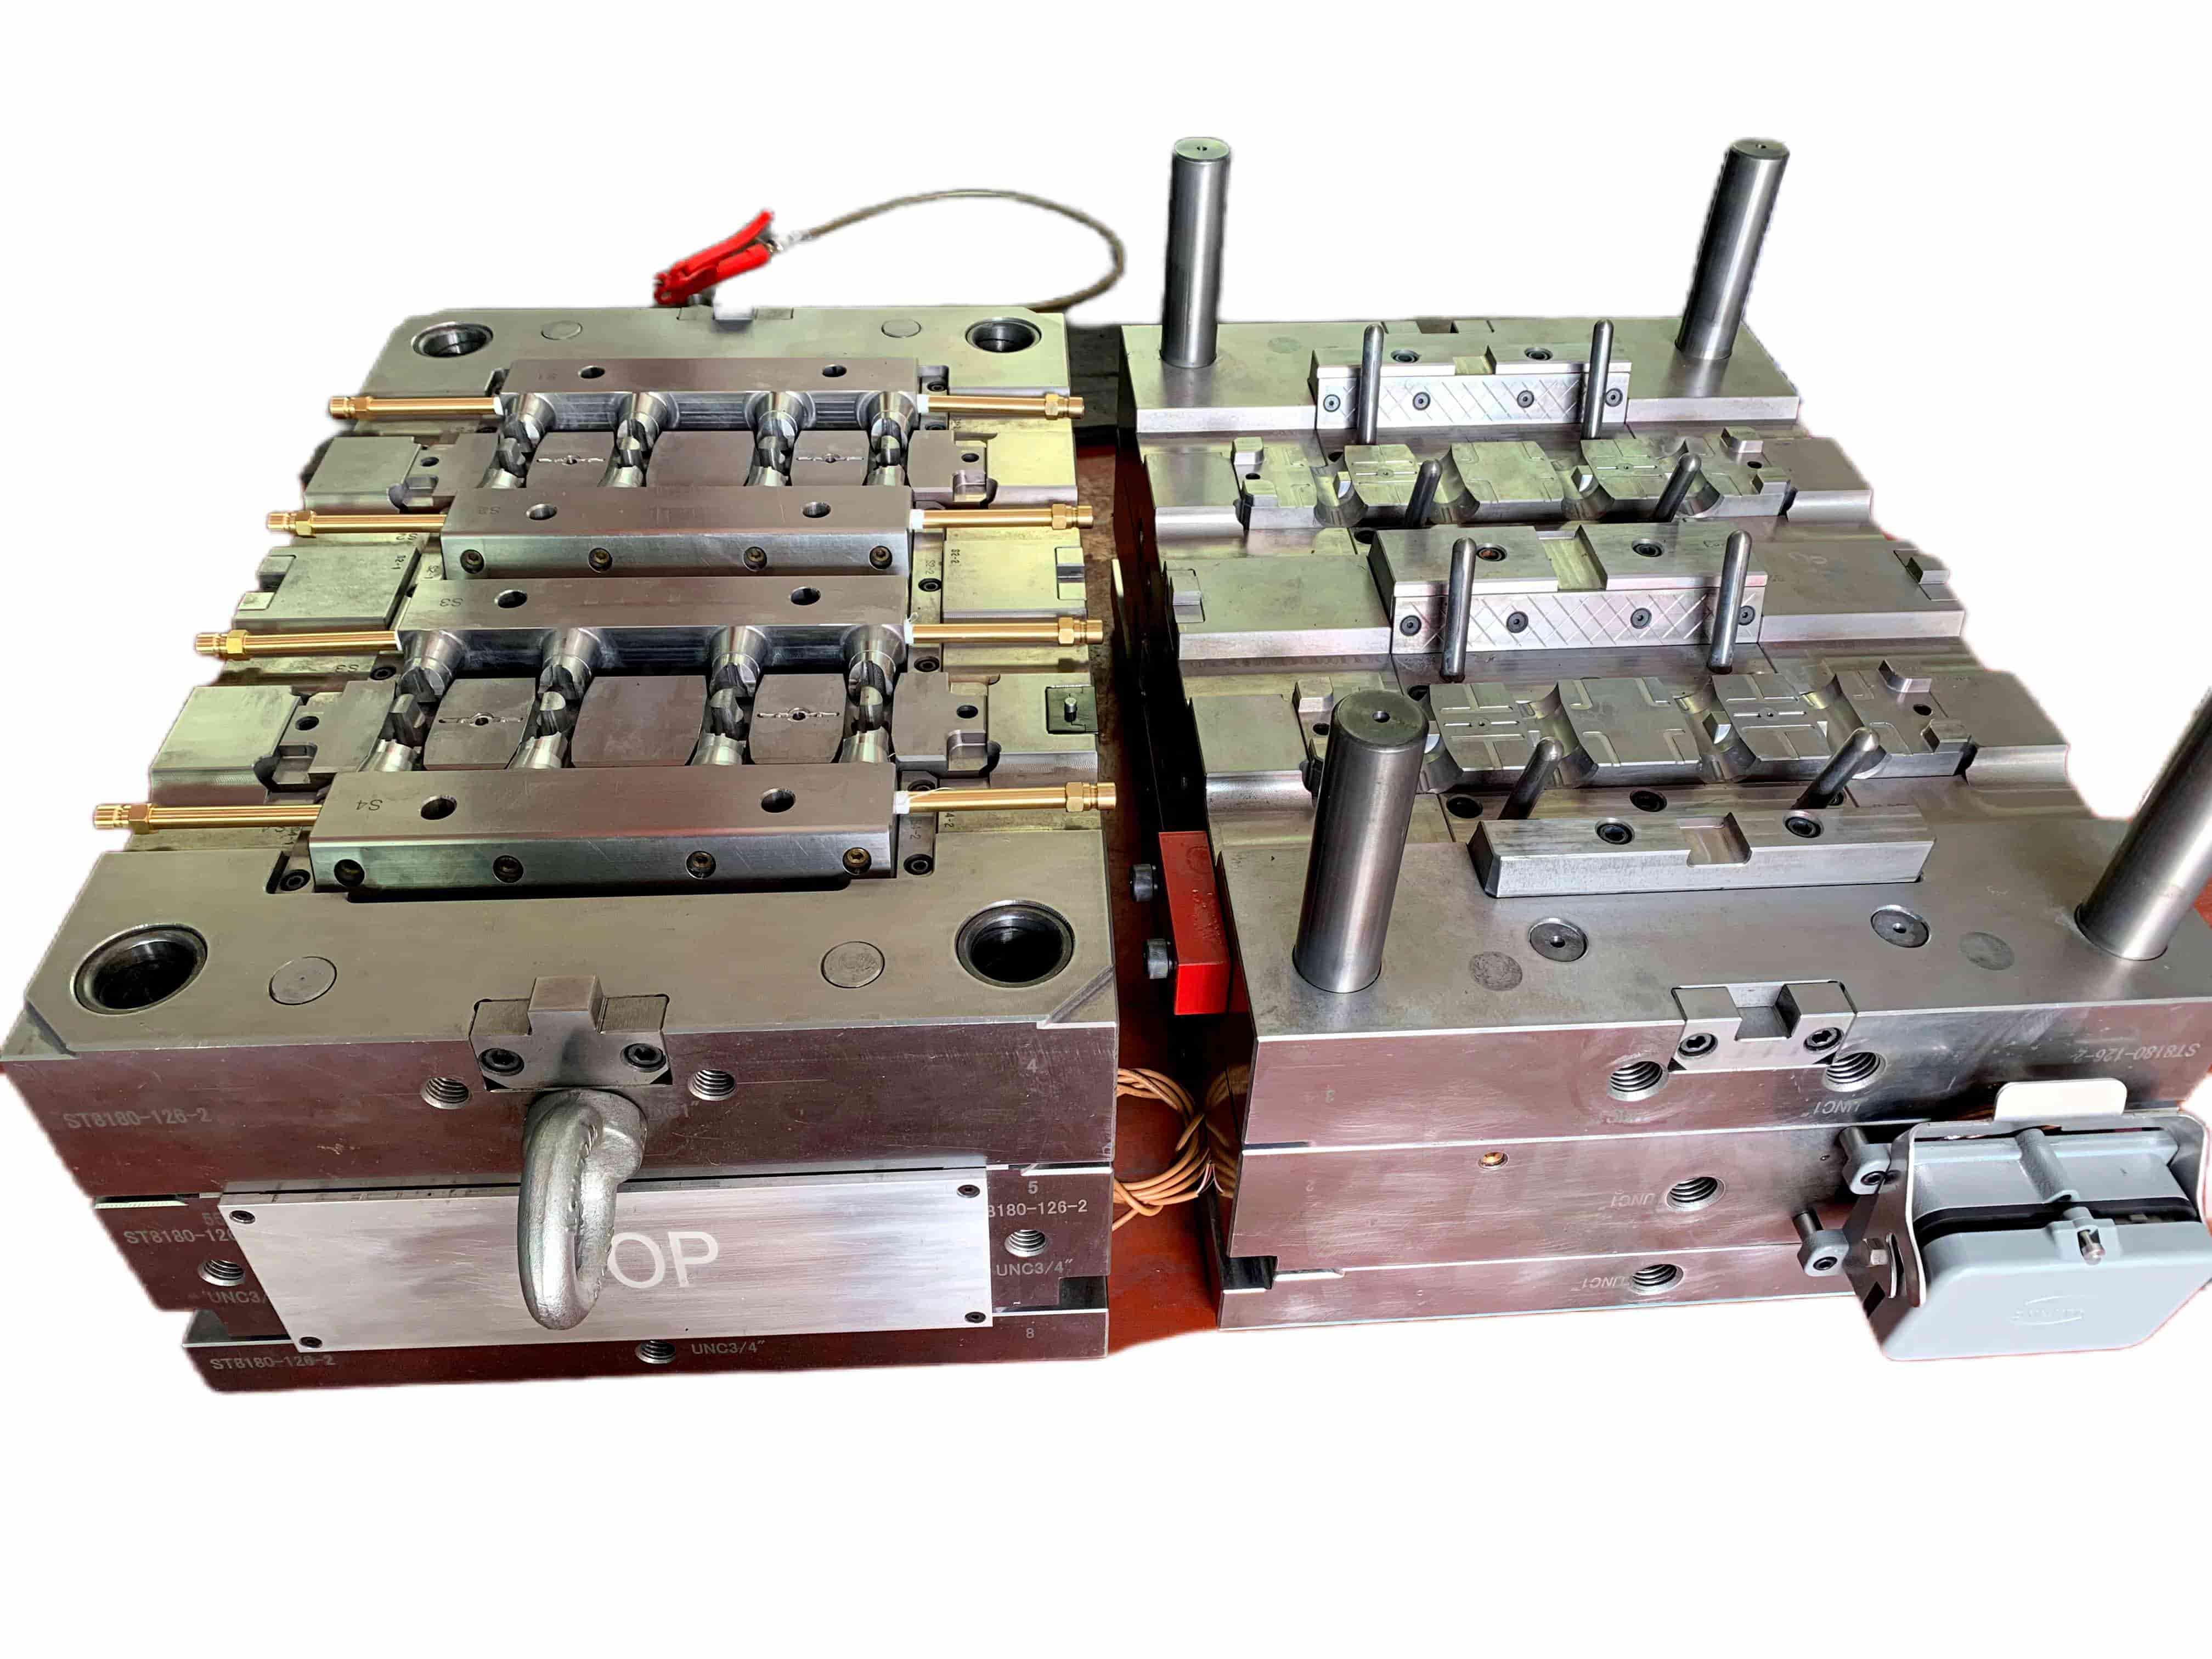 Plastic Injection Mold Maker From China 